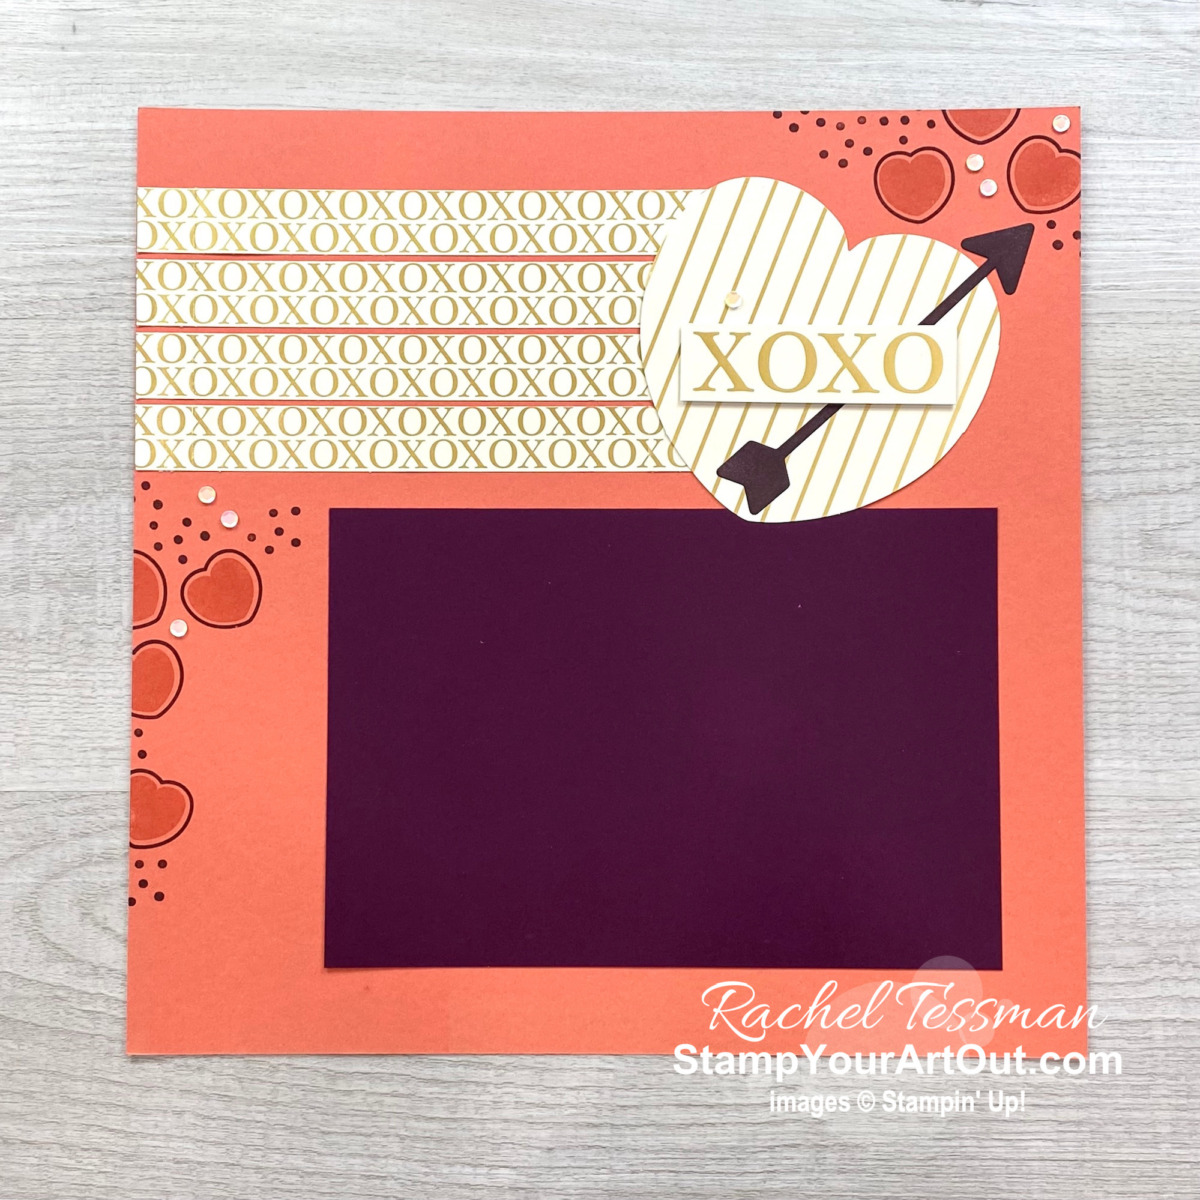 Click here to see a three more alternate projects that I created with elements from the January 2022 Kisses & Hugs Paper Pumpkin Kit. Click here for photos, measurements, tips, and a complete product list linked to my online store. Plus you can see a few other alternate project ideas created with this kit by fellow Stampin’ Up! demonstrators in our PPX blog hop - Stampin’ Up!® - Stamp Your Art Out! www.stampyourartout.com